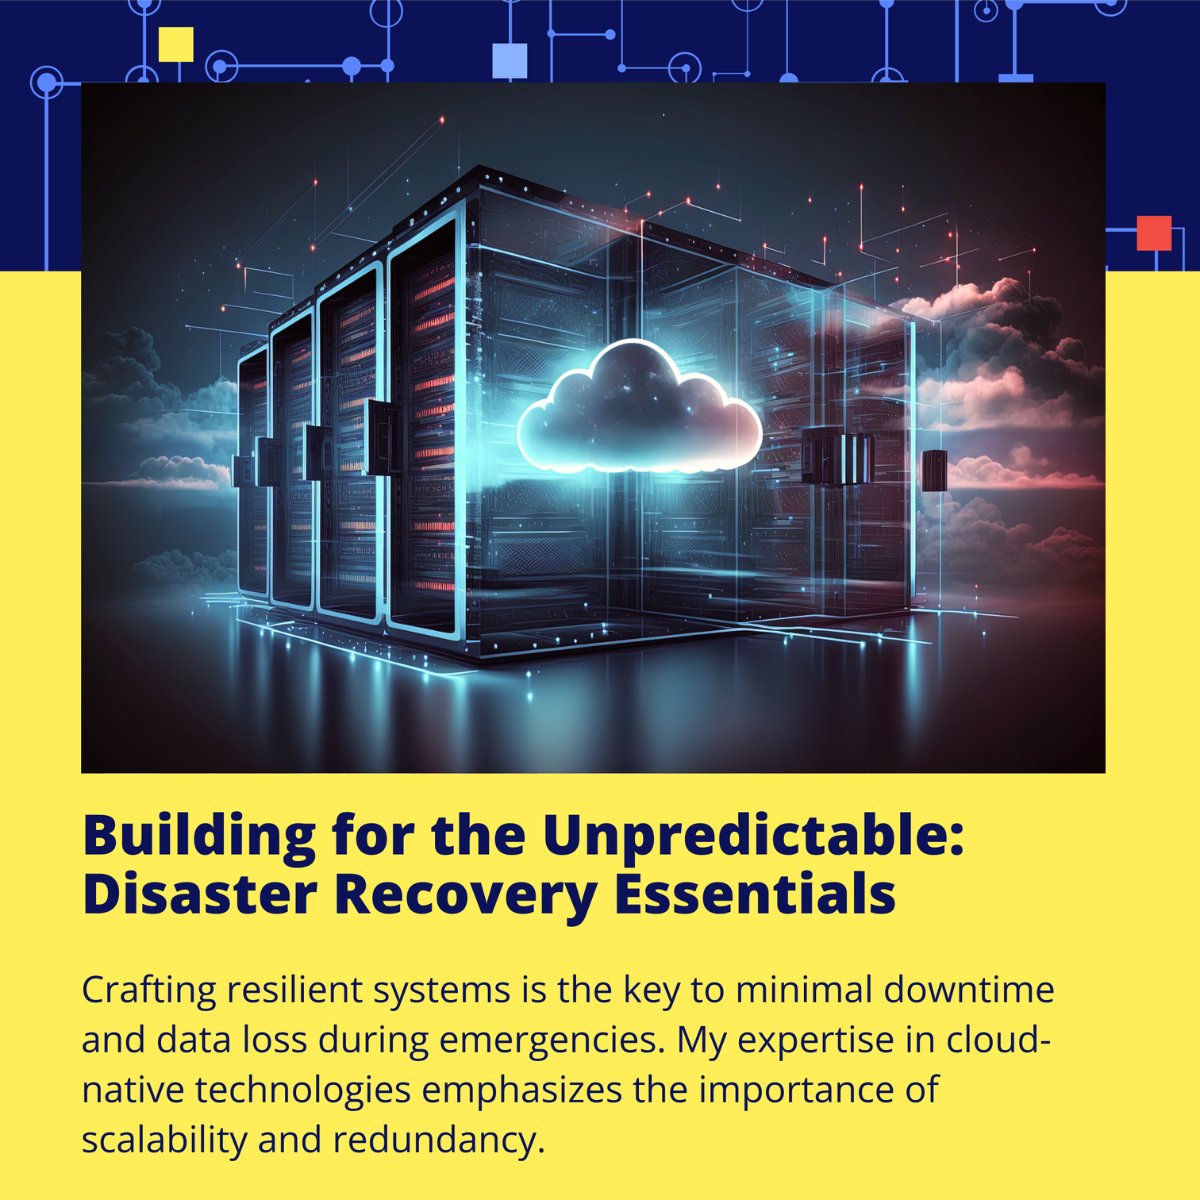 Critical: Disaster recovery for mission-critical apps. The challenge is resilient systems that withstand unforeseen events. My cloud-native expertise stresses scalable, redundant systems for minimal downtime and data loss in emergencies. ☁️💪 #DisasterRecovery #CloudResilience'